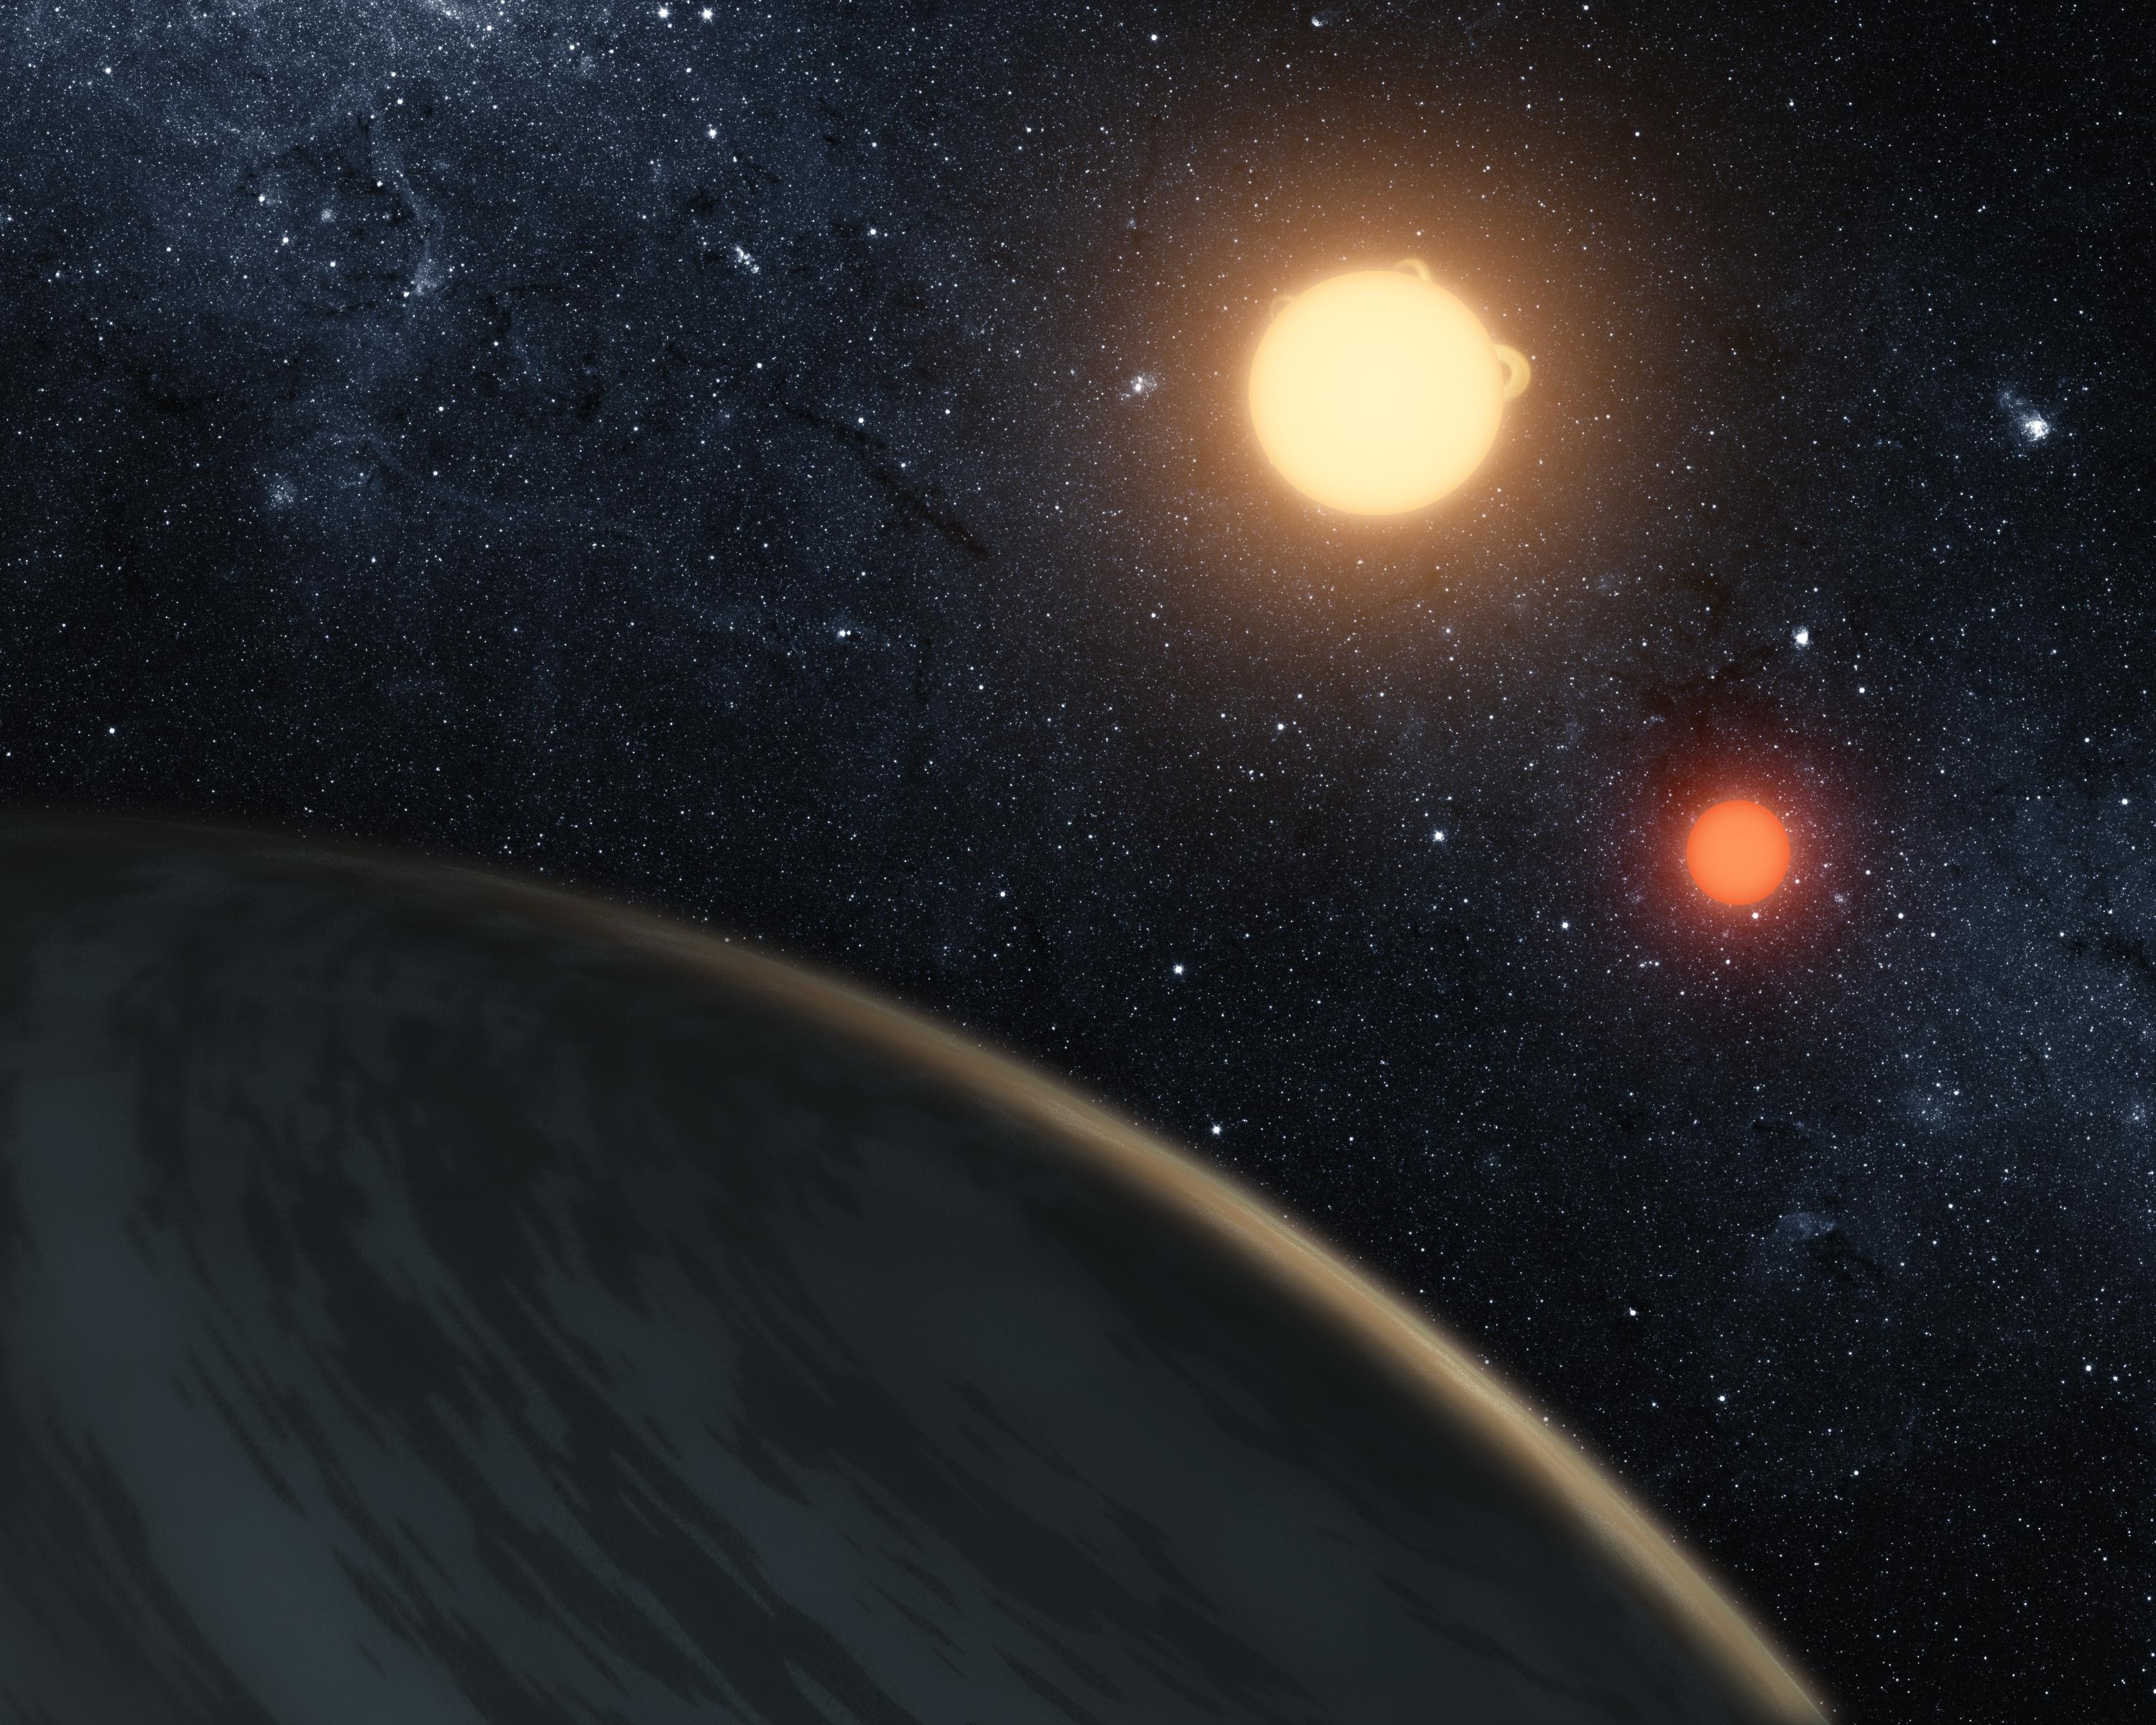 Illustration of the planet Kepler-16b, which has two suns like the one in the Star Wars/NASA saga